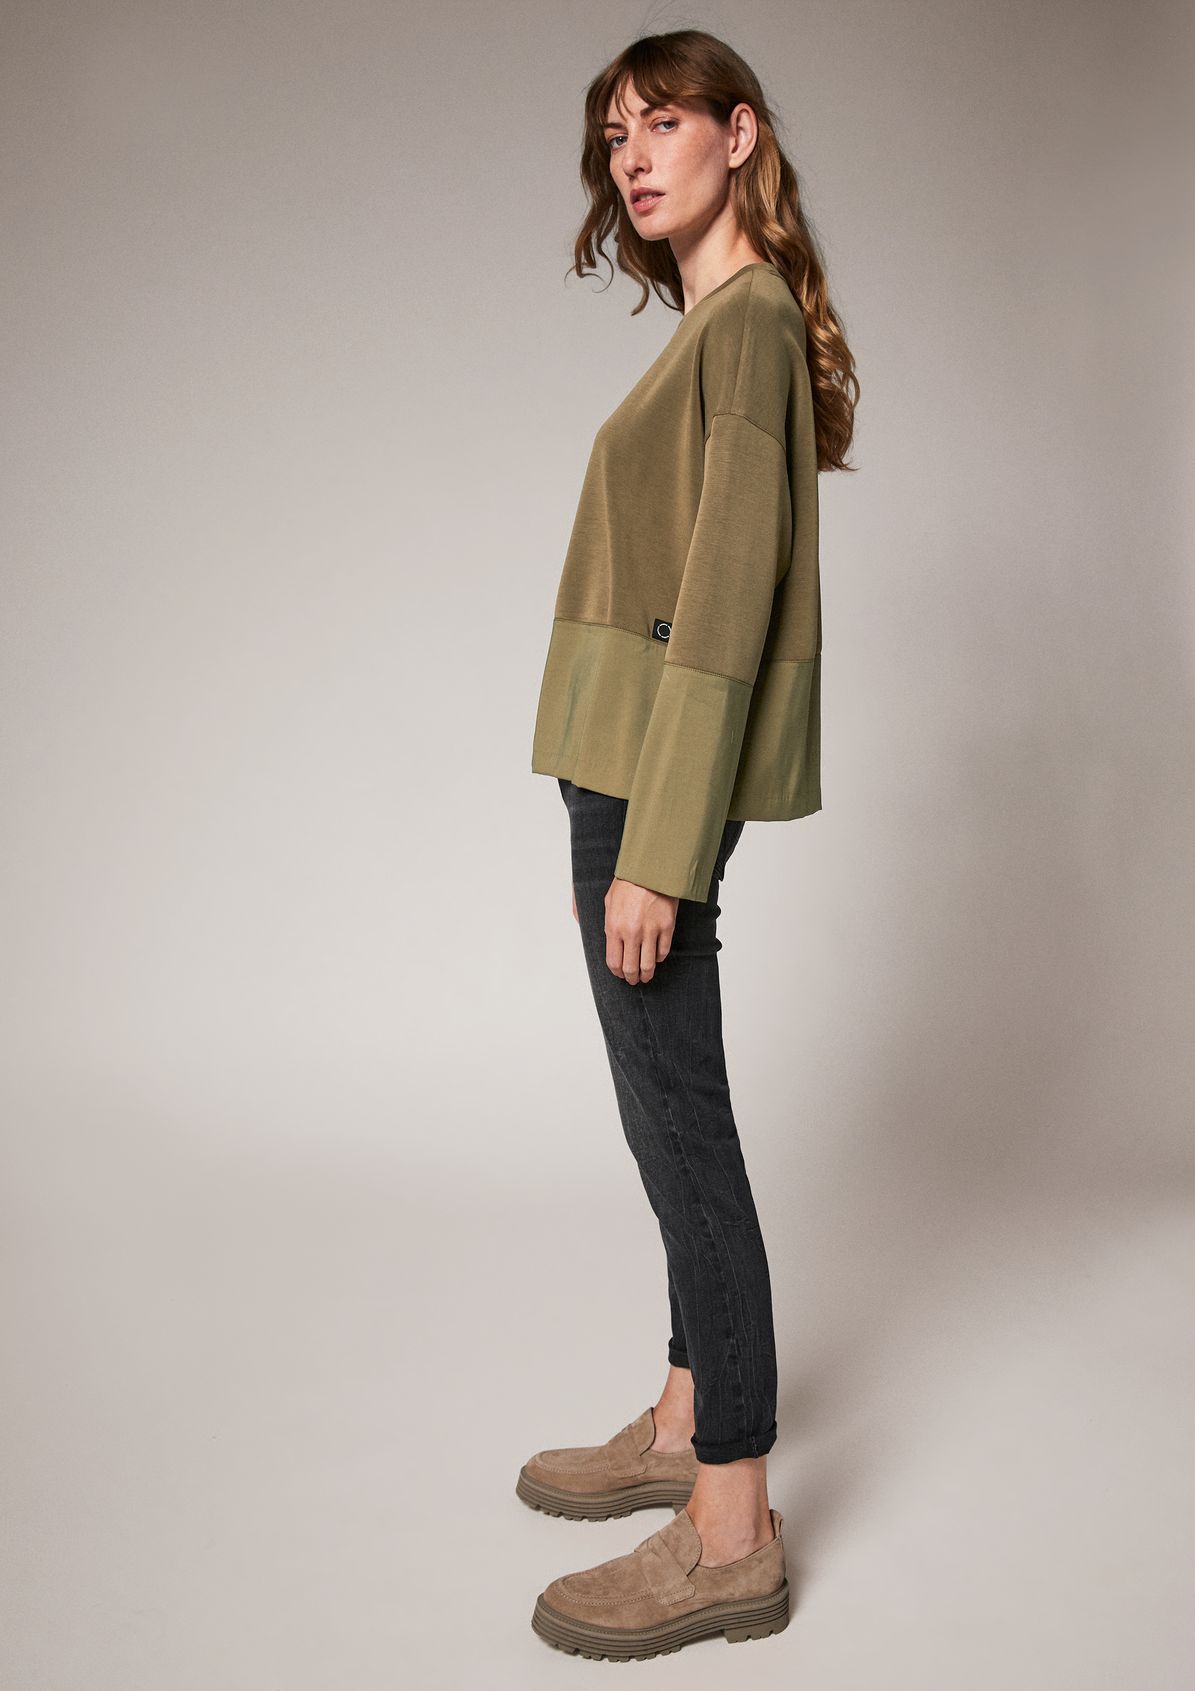 Scuba top with twill sections from comma